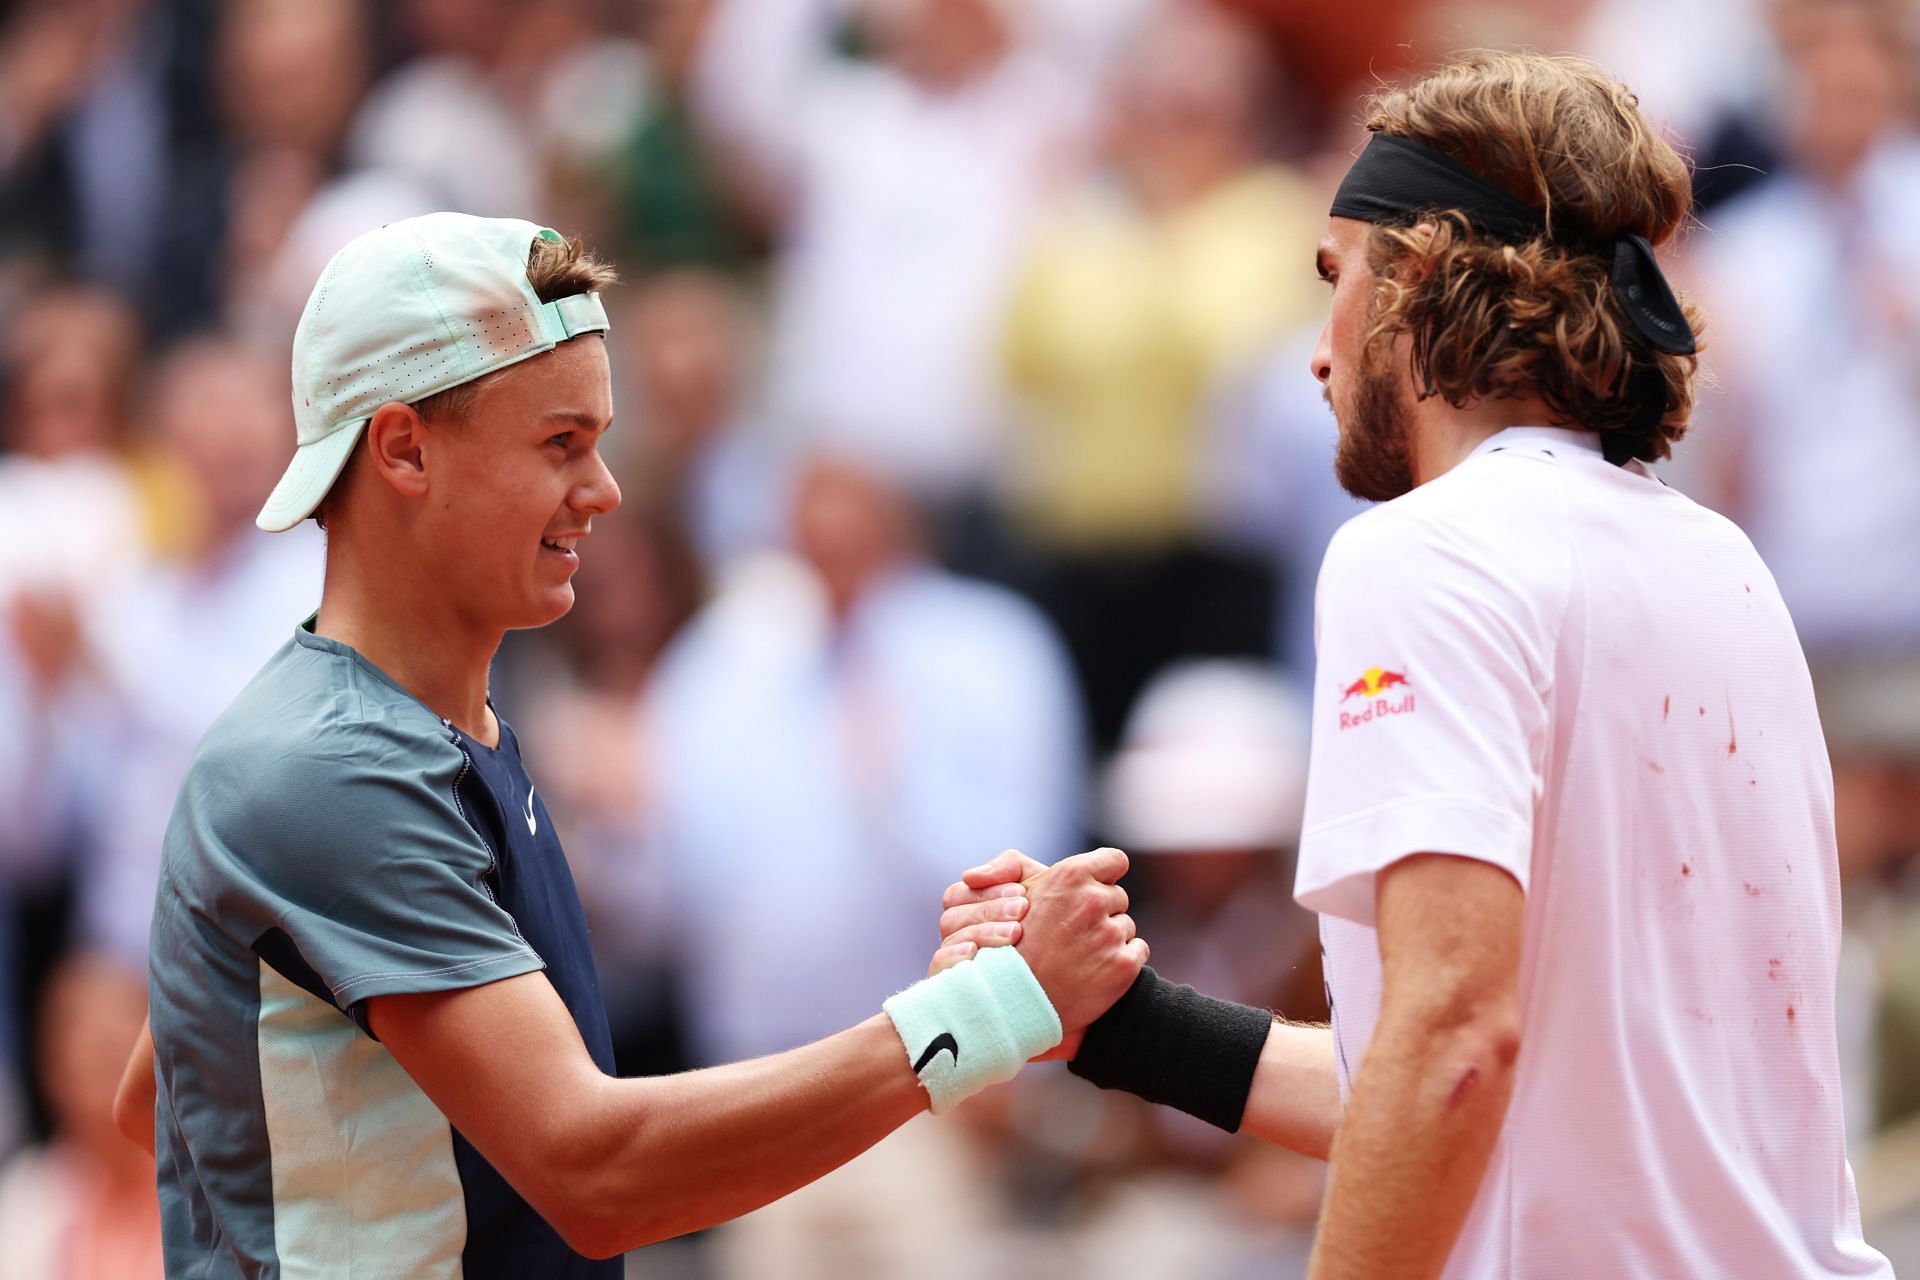 Holger Rune and Stefanos Tsitsipas at the 2022 French Open.